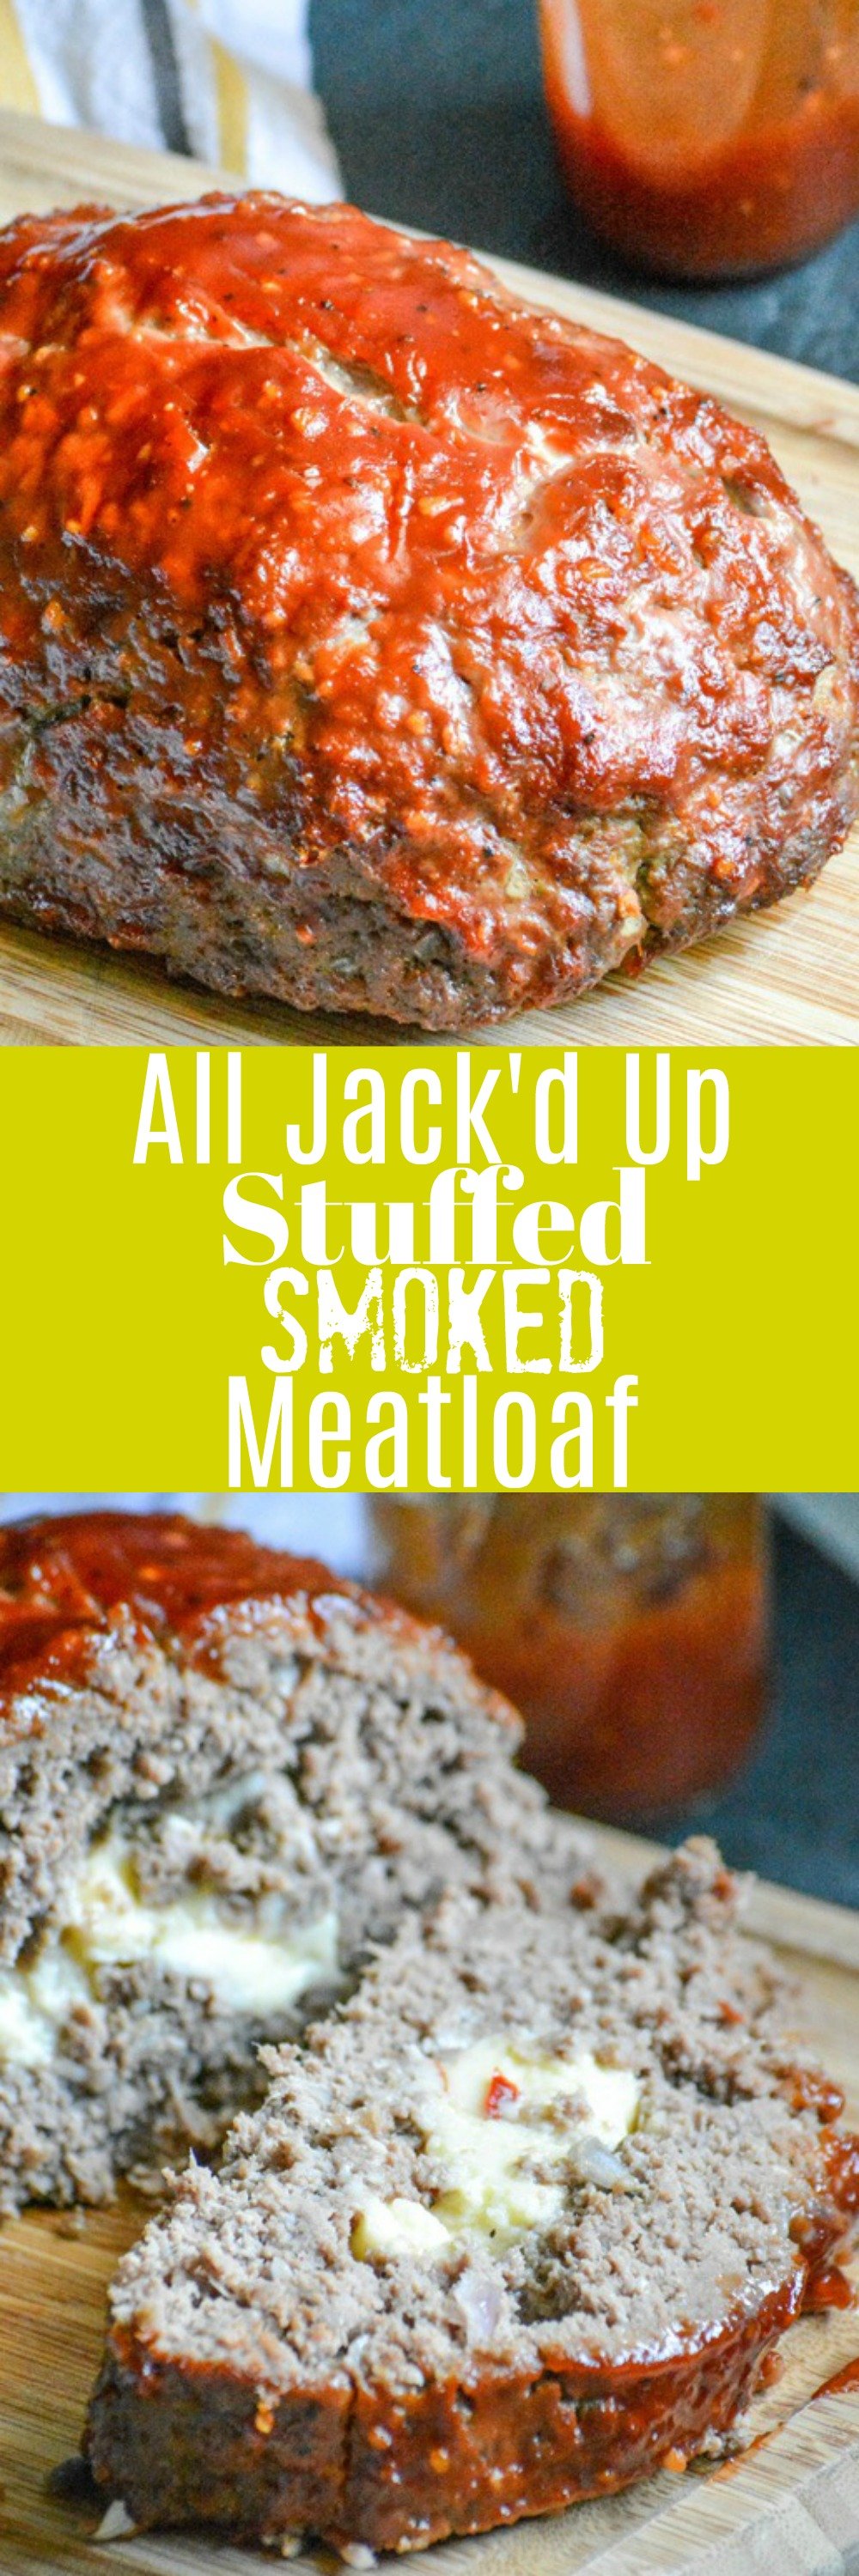 All Jack'd Up Stuffed Smoked Meatloaf PIN - 4 Sons 'R' Us